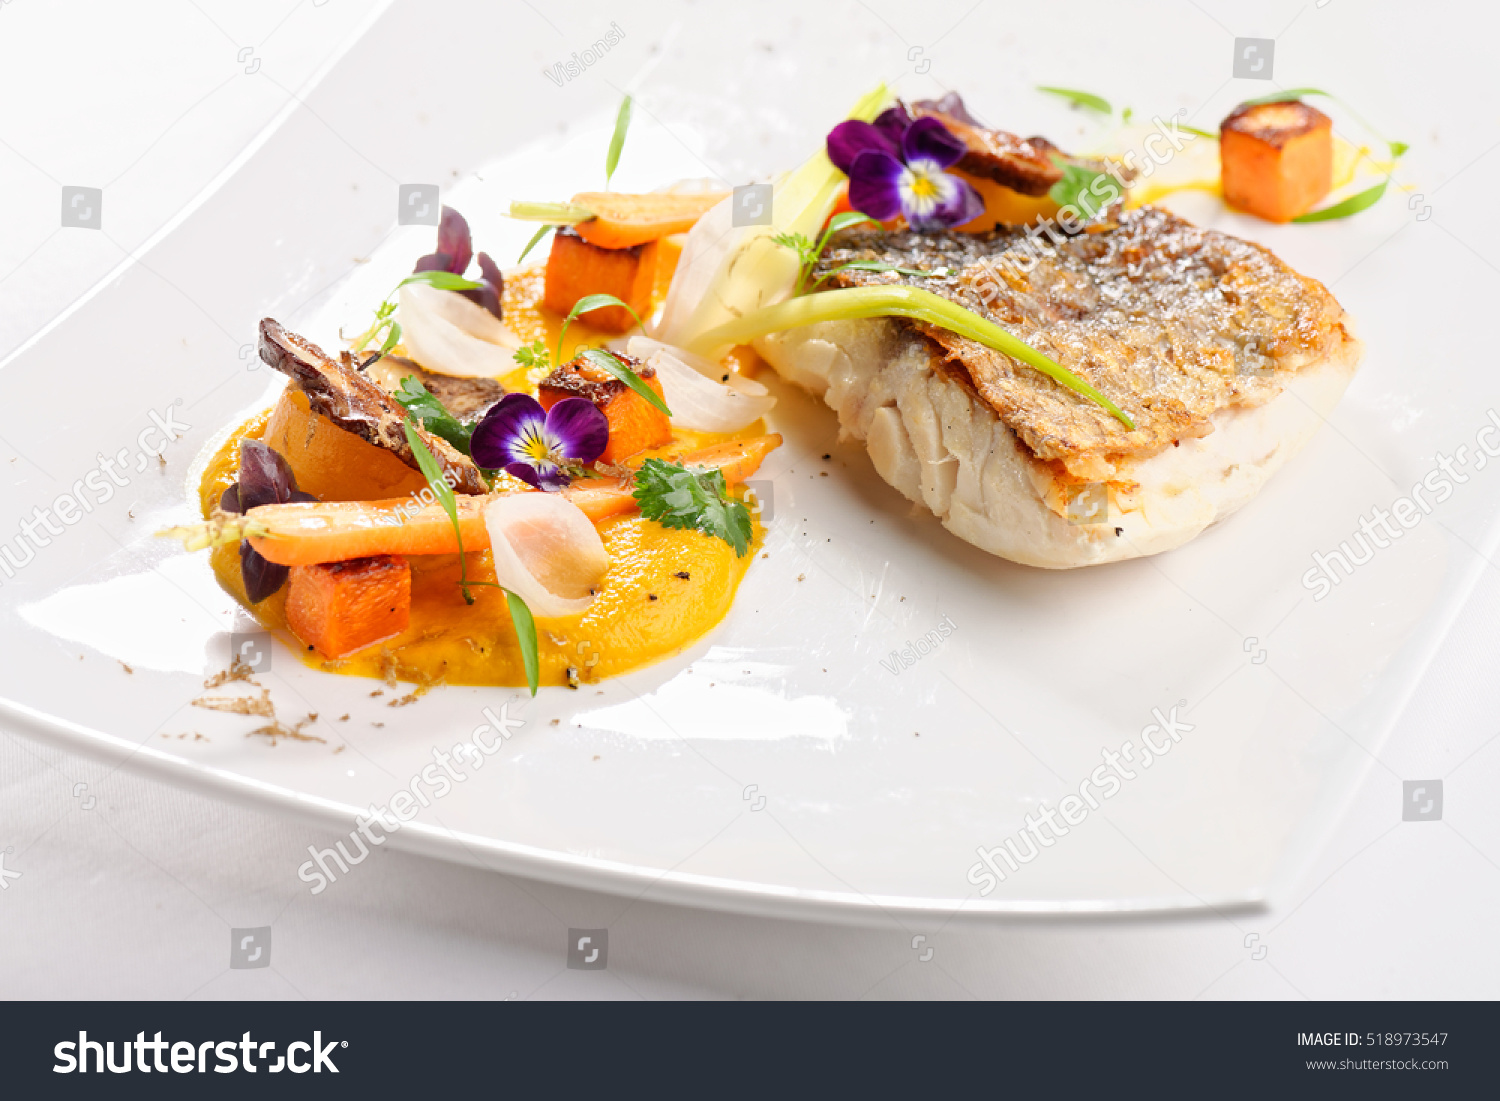 PageLines-stock-photo-fine-dining-fish-fillet-breaded-in-herbs-and